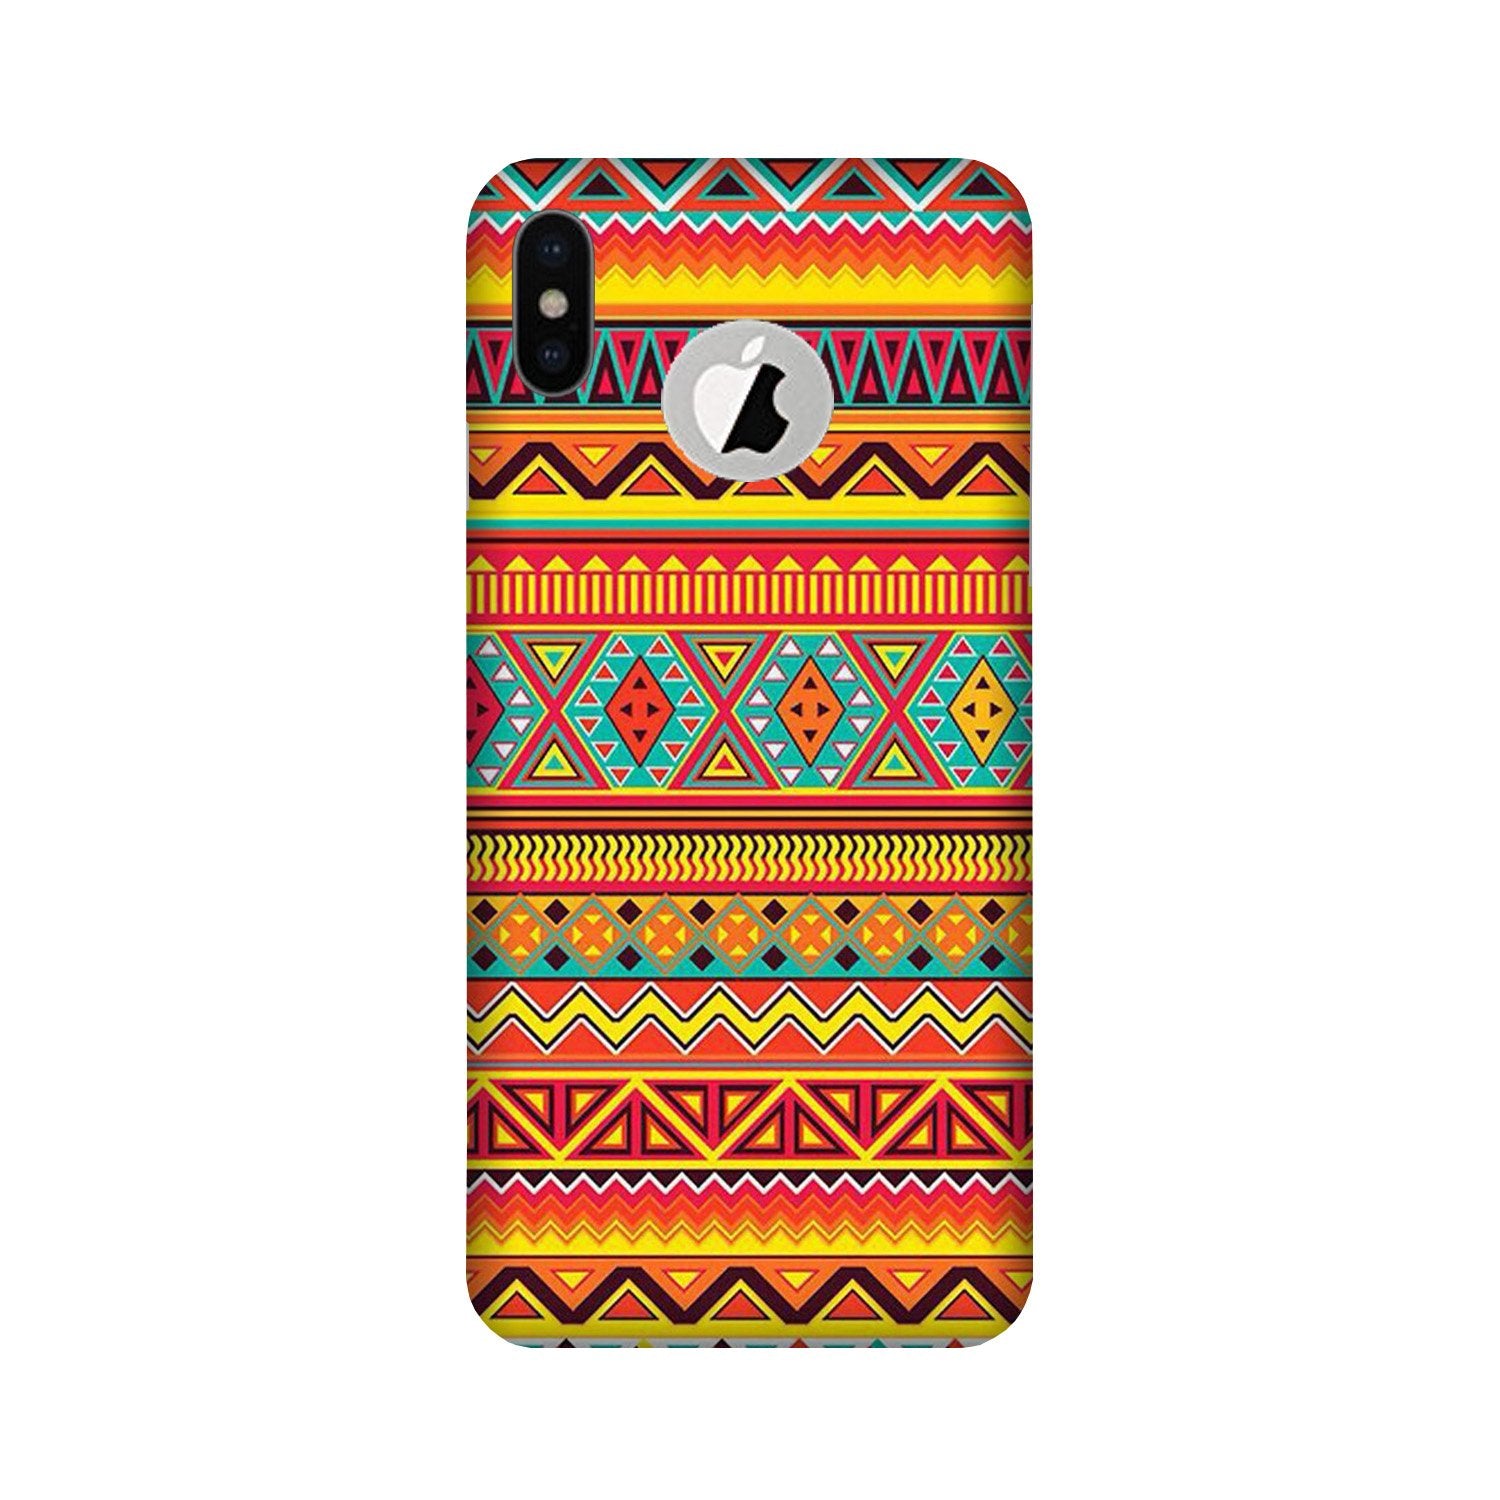 Zigzag line pattern Case for iPhone Xs logo cut 